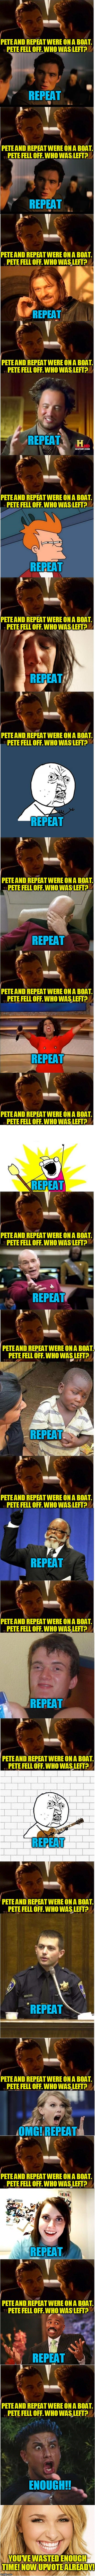 Pete and Repeat!! |  PETE AND REPEAT WERE ON A BOAT. PETE FELL OFF. WHO WAS LEFT? REPEAT; PETE AND REPEAT WERE ON A BOAT. PETE FELL OFF. WHO WAS LEFT? REPEAT; PETE AND REPEAT WERE ON A BOAT. PETE FELL OFF. WHO WAS LEFT? REPEAT; PETE AND REPEAT WERE ON A BOAT. PETE FELL OFF. WHO WAS LEFT? REPEAT; PETE AND REPEAT WERE ON A BOAT. PETE FELL OFF. WHO WAS LEFT? REPEAT; PETE AND REPEAT WERE ON A BOAT. PETE FELL OFF. WHO WAS LEFT? REPEAT; PETE AND REPEAT WERE ON A BOAT. PETE FELL OFF. WHO WAS LEFT? REPEAT; PETE AND REPEAT WERE ON A BOAT. PETE FELL OFF. WHO WAS LEFT? REPEAT; PETE AND REPEAT WERE ON A BOAT. PETE FELL OFF. WHO WAS LEFT? REPEAT; PETE AND REPEAT WERE ON A BOAT. PETE FELL OFF. WHO WAS LEFT? REPEAT; PETE AND REPEAT WERE ON A BOAT. PETE FELL OFF. WHO WAS LEFT? REPEAT; PETE AND REPEAT WERE ON A BOAT. PETE FELL OFF. WHO WAS LEFT? REPEAT; PETE AND REPEAT WERE ON A BOAT. PETE FELL OFF. WHO WAS LEFT? REPEAT; PETE AND REPEAT WERE ON A BOAT. PETE FELL OFF. WHO WAS LEFT? REPEAT; PETE AND REPEAT WERE ON A BOAT. PETE FELL OFF. WHO WAS LEFT? REPEAT; PETE AND REPEAT WERE ON A BOAT. PETE FELL OFF. WHO WAS LEFT? REPEAT; PETE AND REPEAT WERE ON A BOAT. PETE FELL OFF. WHO WAS LEFT? OMG! REPEAT; PETE AND REPEAT WERE ON A BOAT. PETE FELL OFF. WHO WAS LEFT? REPEAT; PETE AND REPEAT WERE ON A BOAT. PETE FELL OFF. WHO WAS LEFT? REPEAT; PETE AND REPEAT WERE ON A BOAT. PETE FELL OFF. WHO WAS LEFT? ENOUGH!! YOU'VE WASTED ENOUGH TIME! NOW UPVOTE ALREADY! | image tagged in tammyfaye,this took 3 hours | made w/ Imgflip meme maker